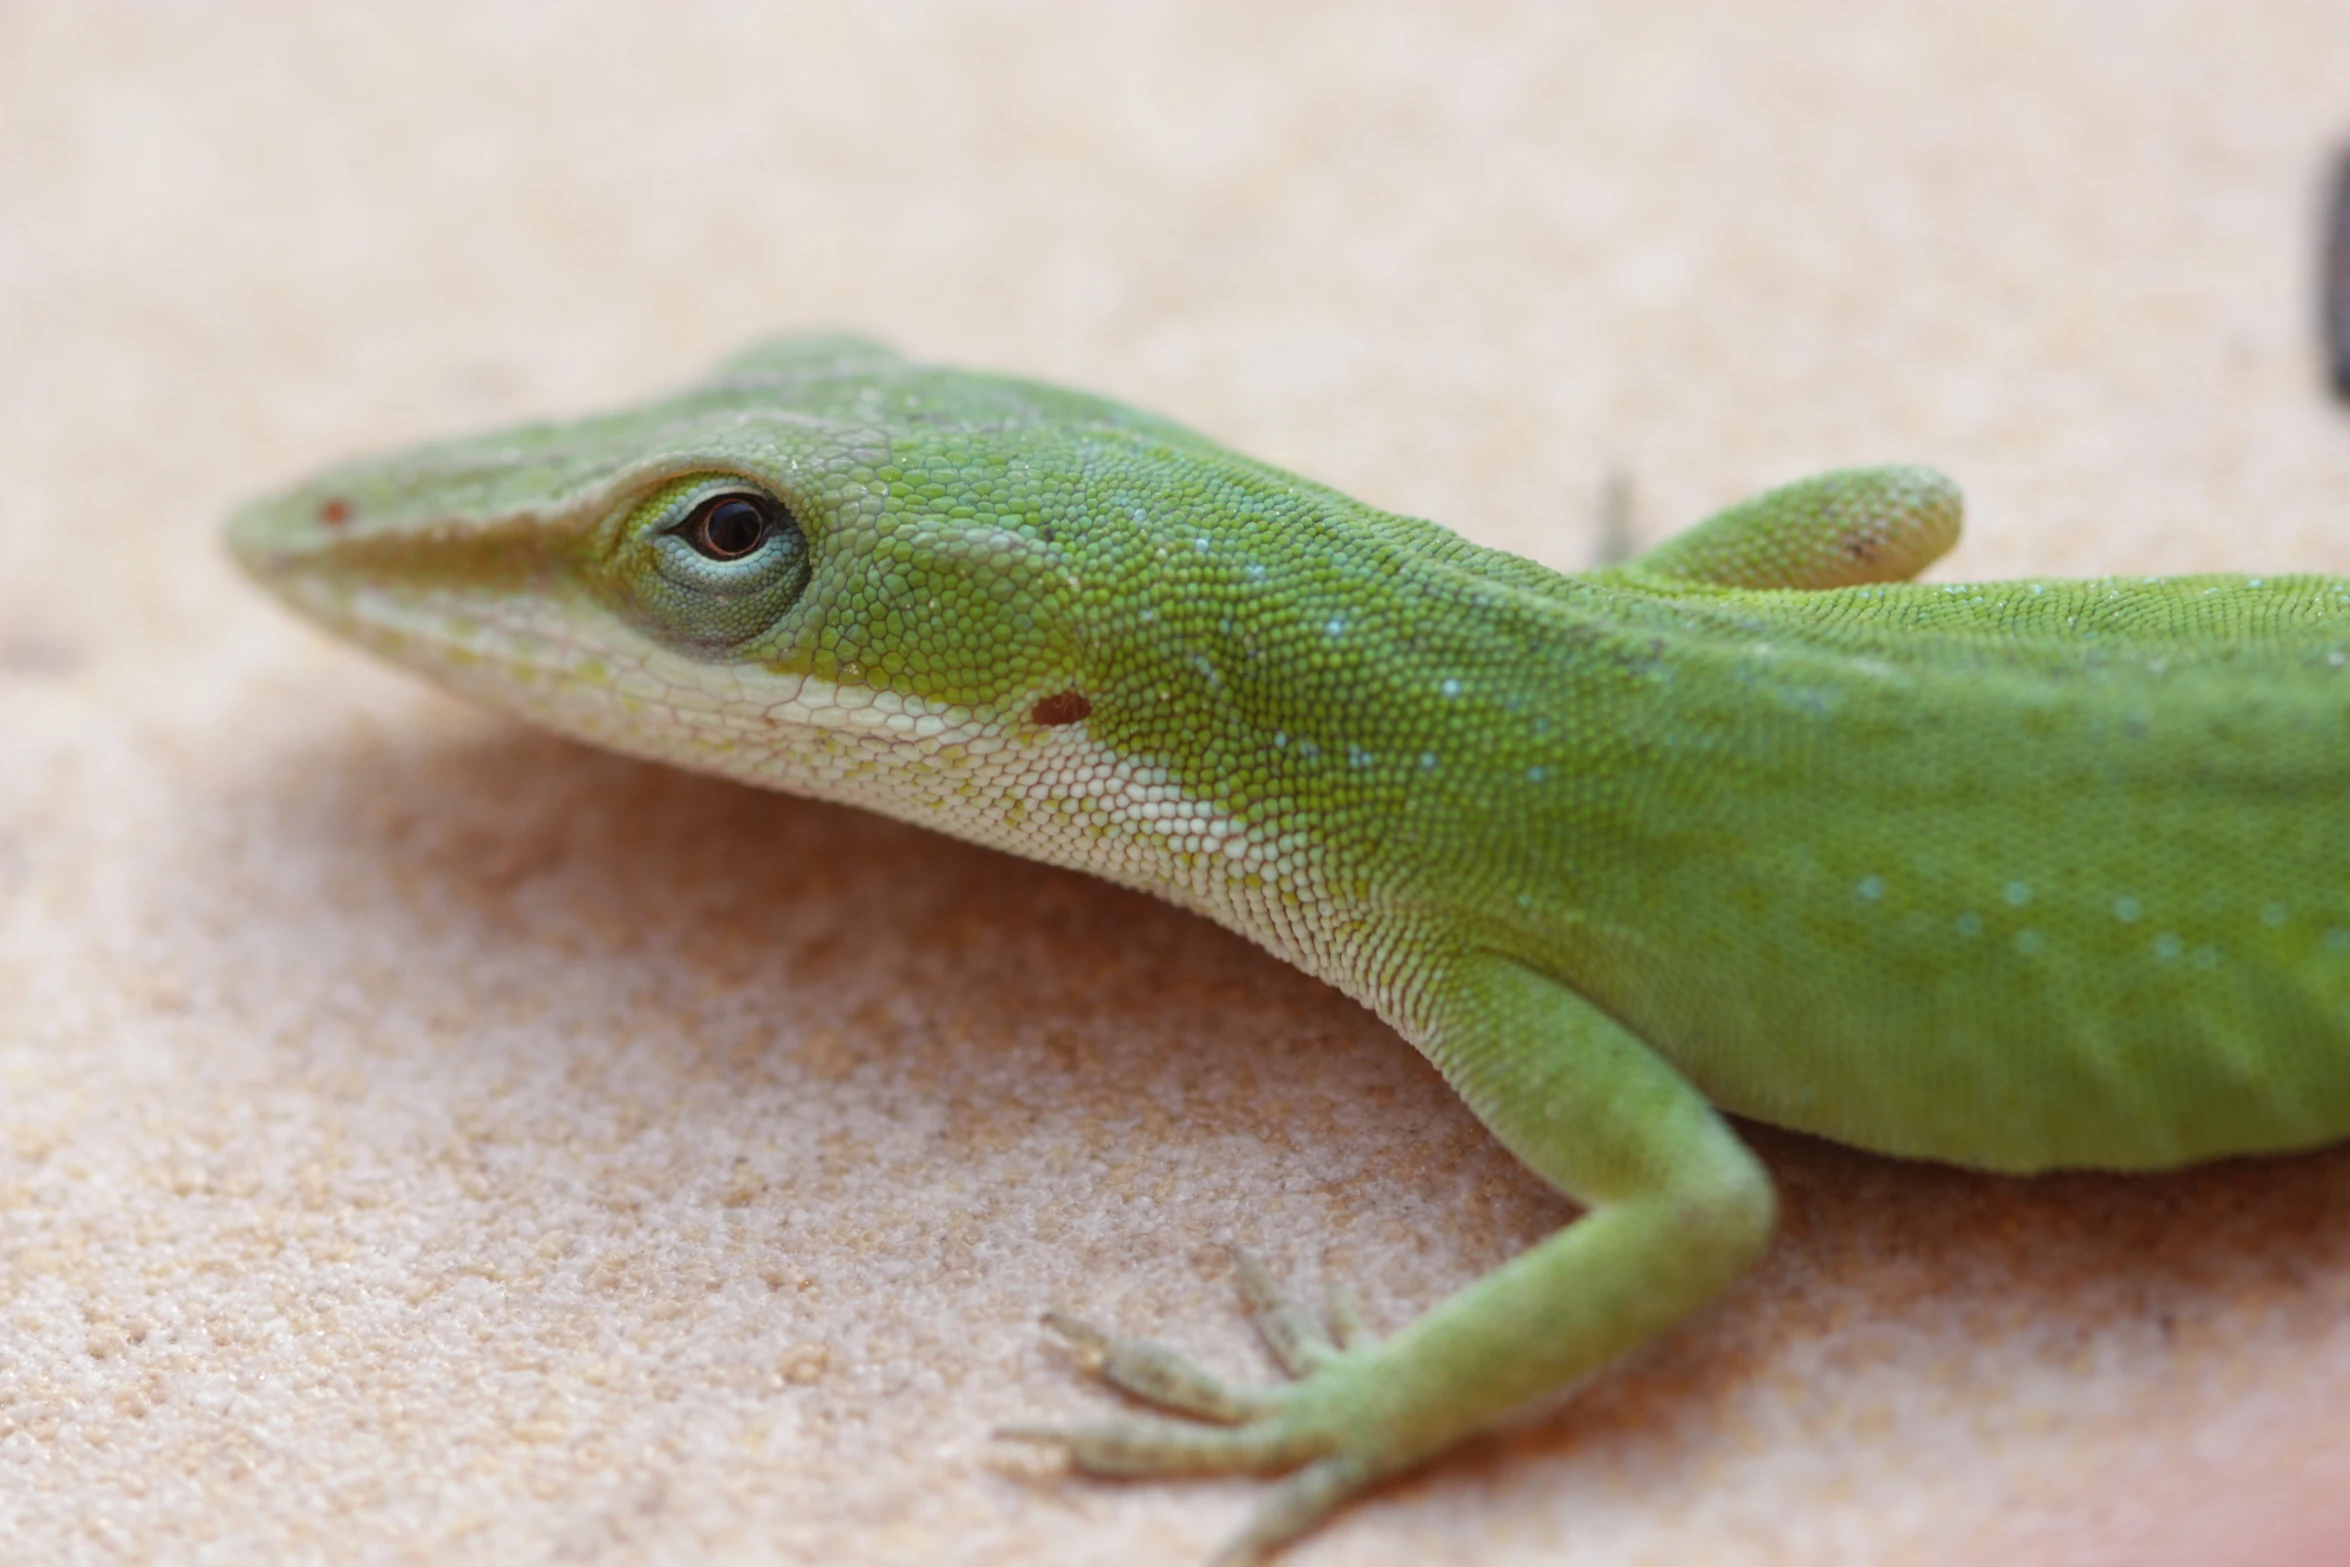 small green lizard sitting on someone's hand